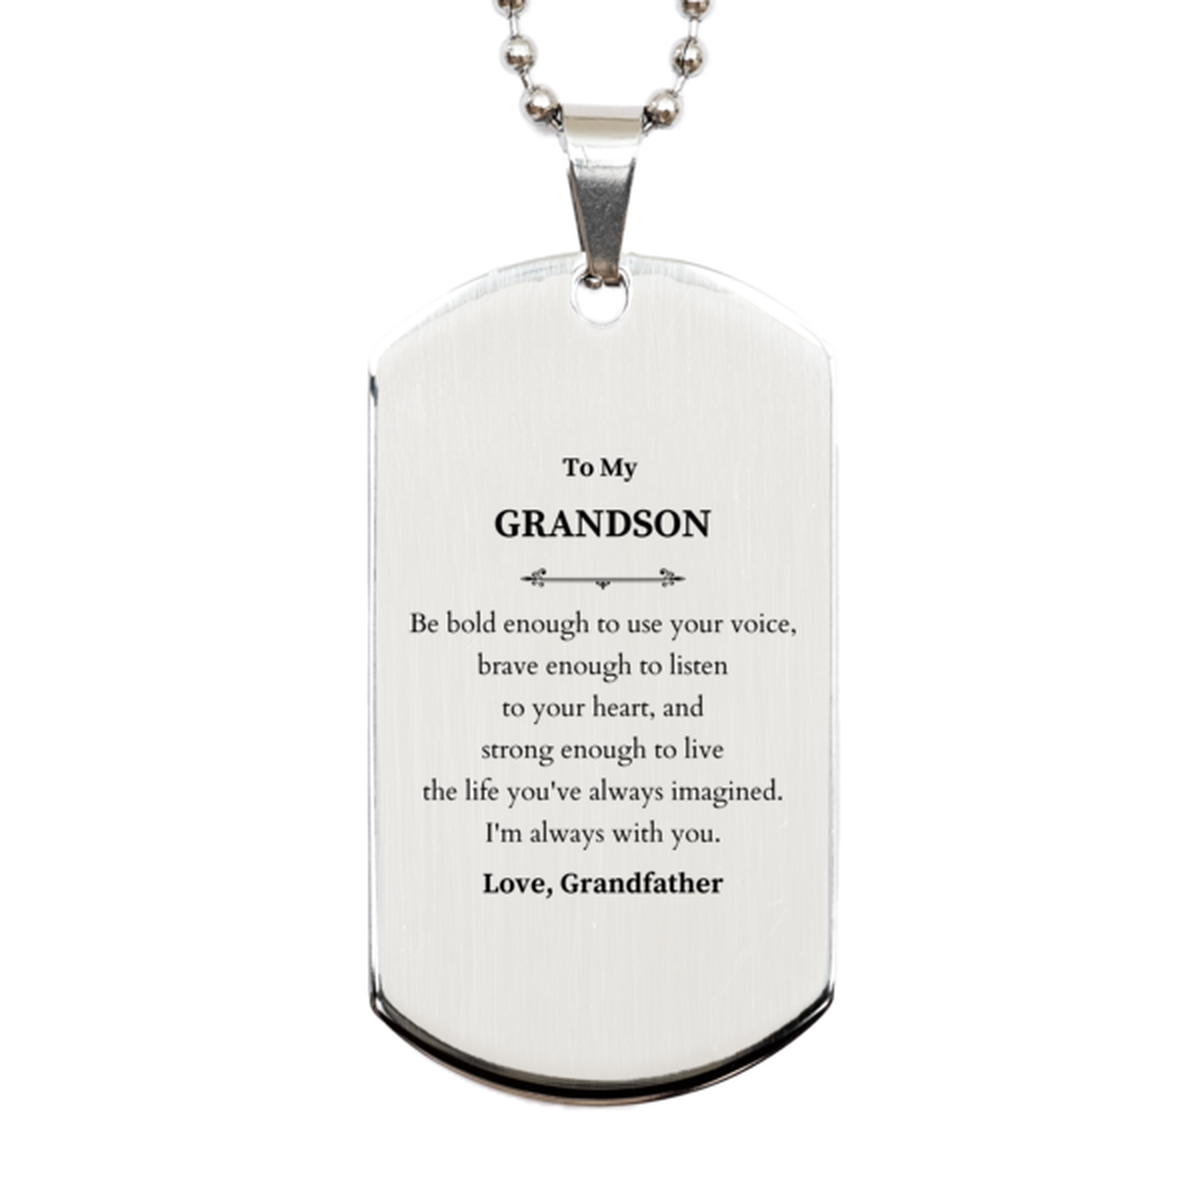 Keepsake Grandson Silver Dog Tag Gift Idea Graduation Christmas Birthday Grandson from Grandfather, Grandson Be bold enough to use your voice, brave enough to listen to your heart. Love, Grandfather